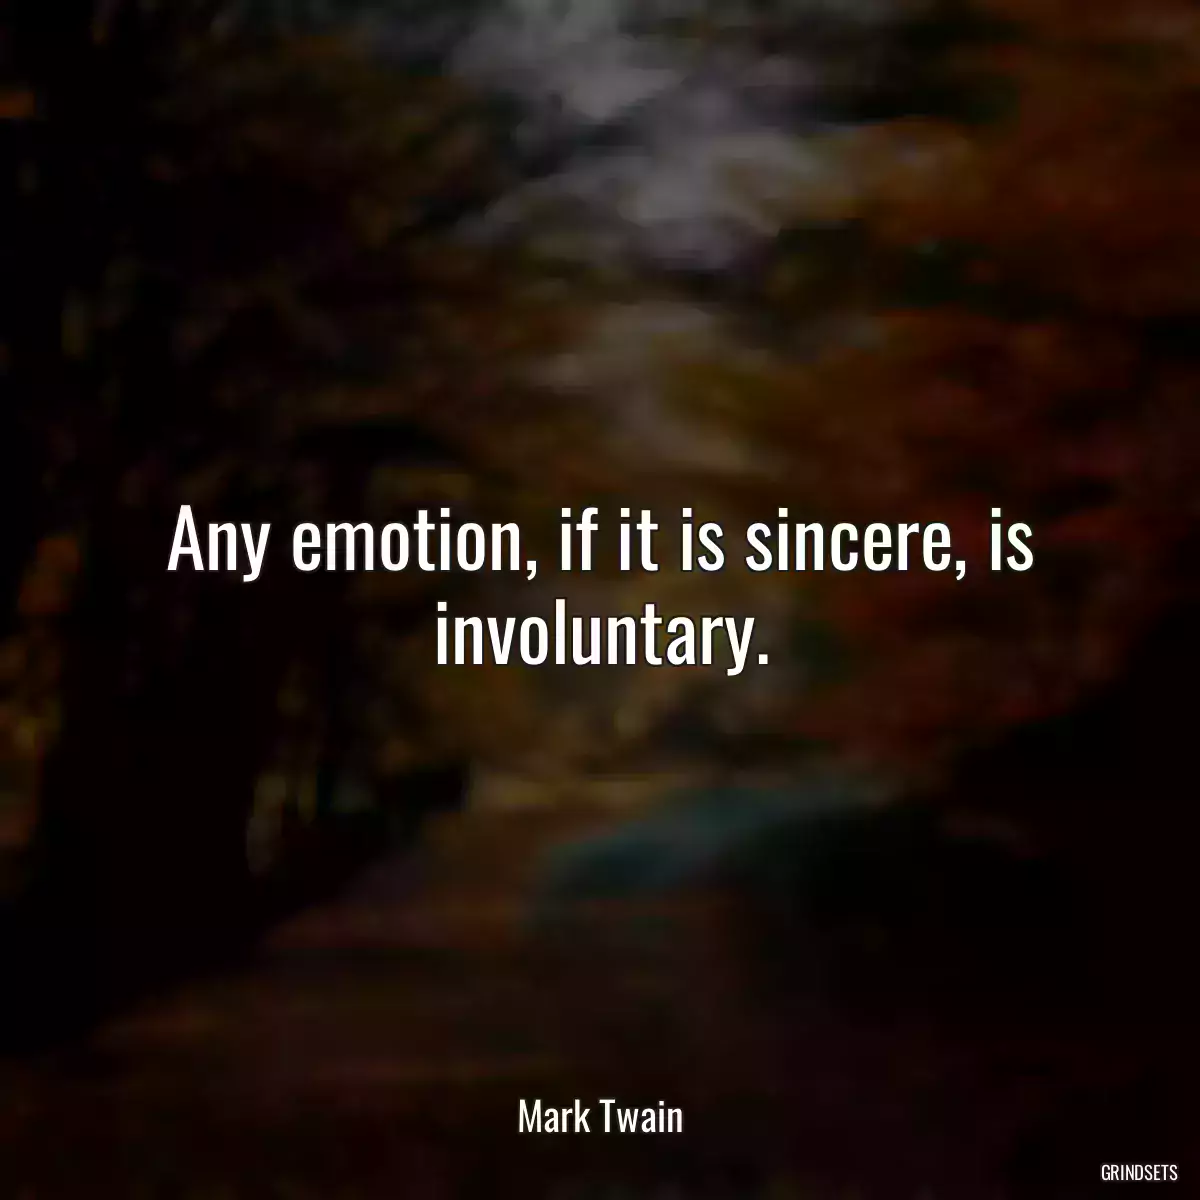 Any emotion, if it is sincere, is involuntary.